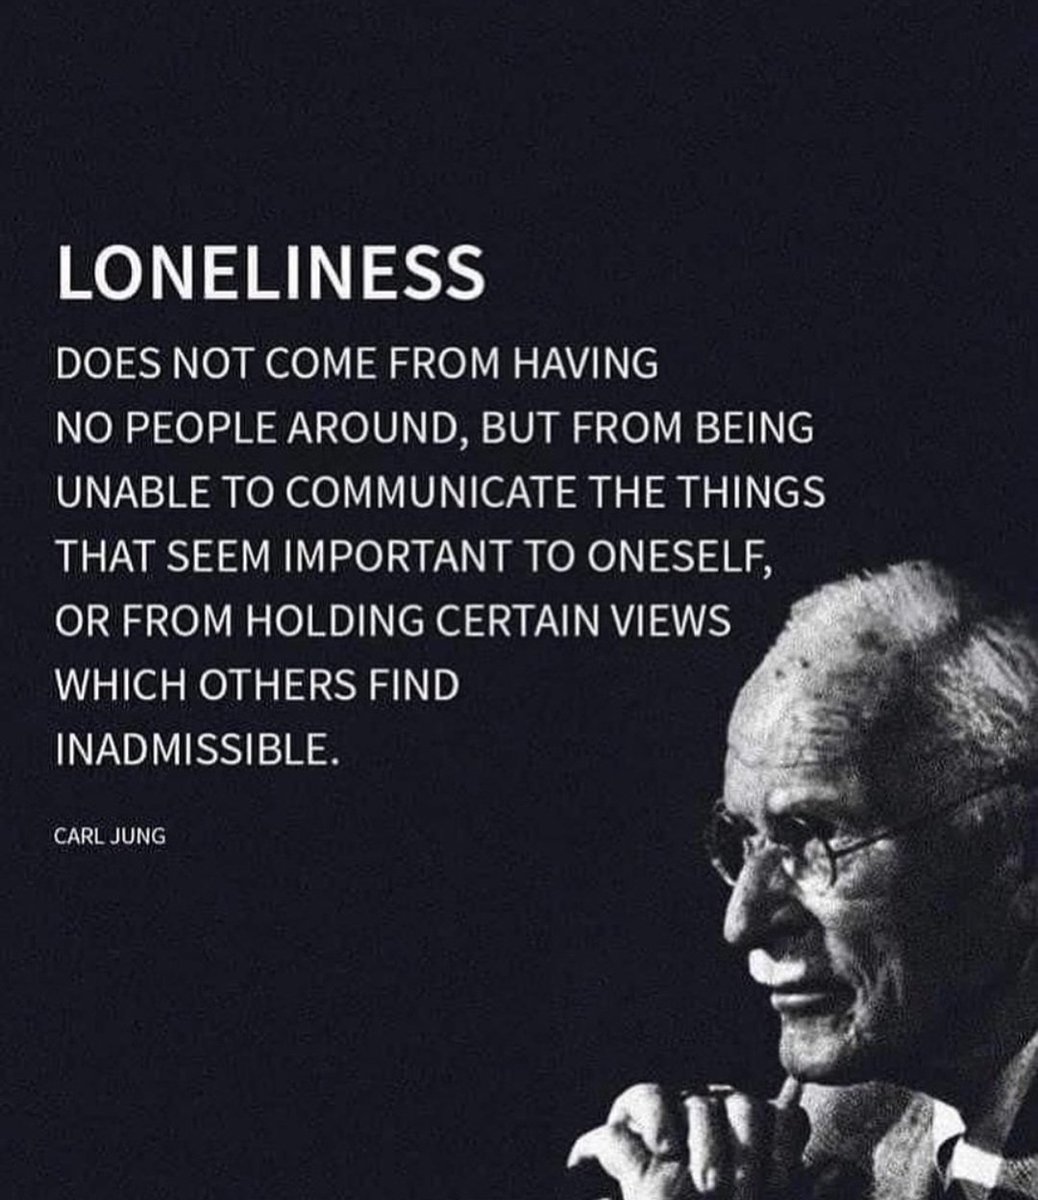 I can be alone. I cannot be where I am with people and feel lonely. - Me #carljung #griefdoctor #loneliness